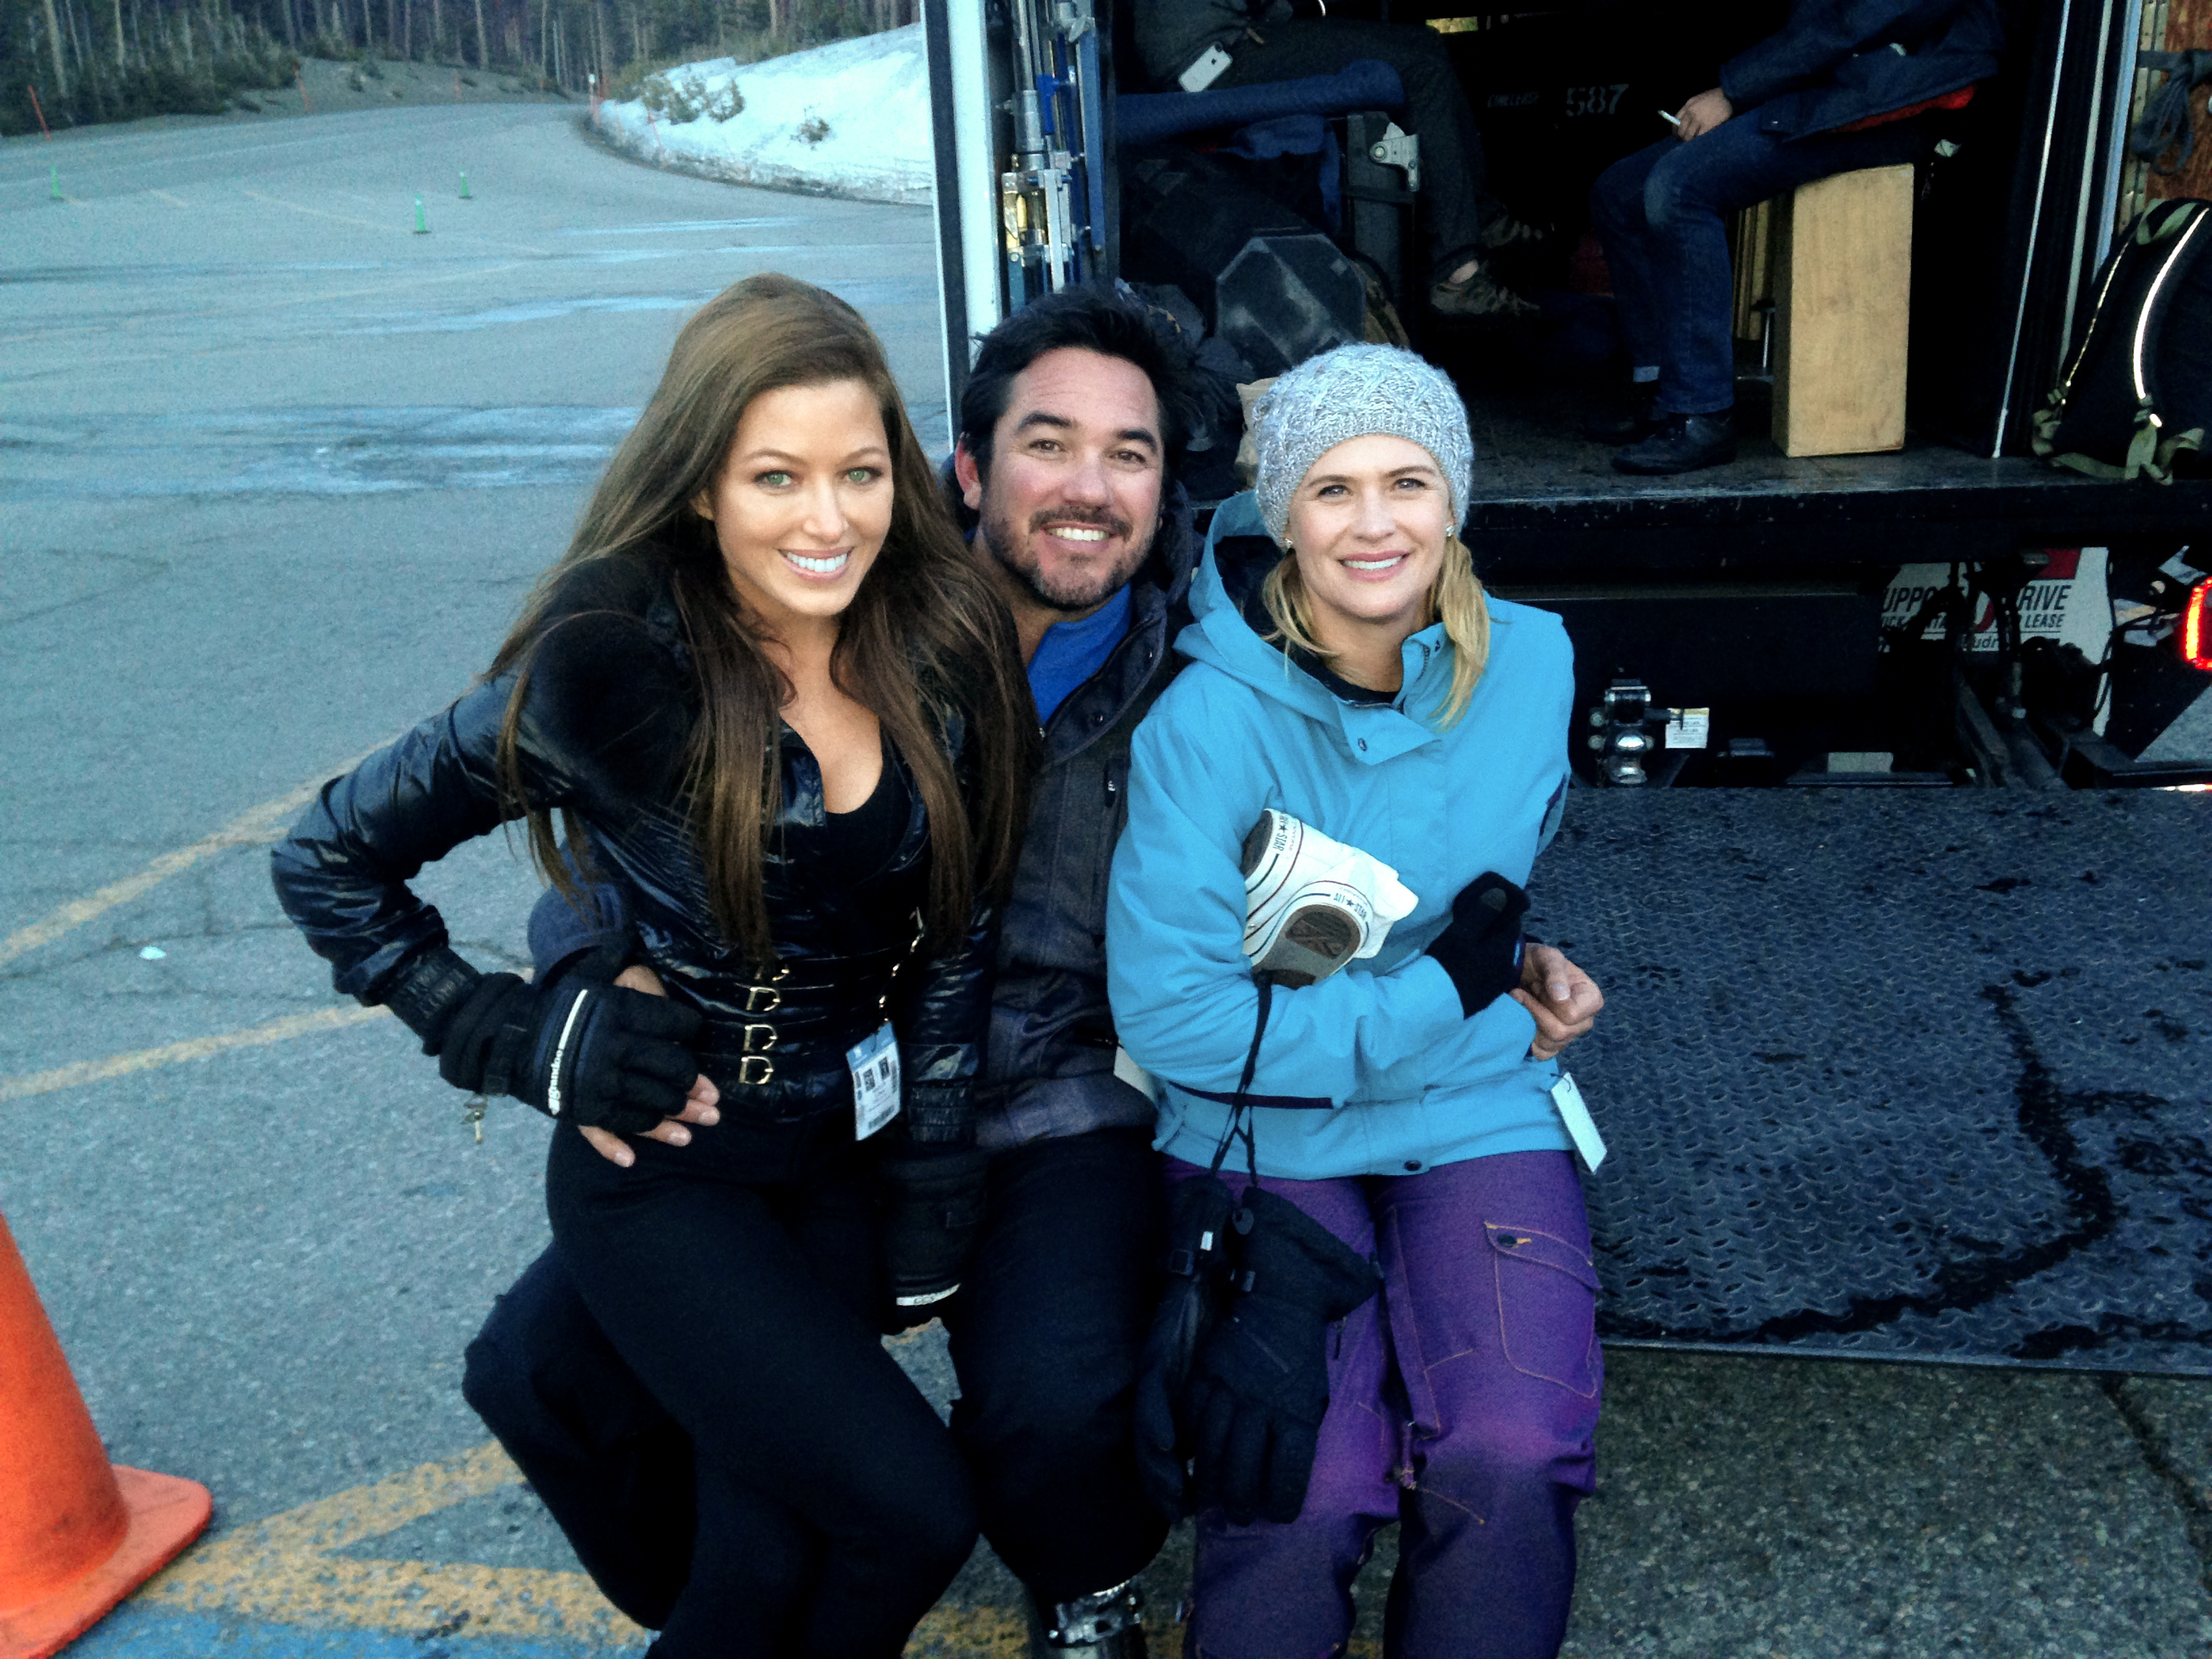 Rebecca Grant, Dean Cain, Kristy Swanson on set of Merry X-mas (ION Network)